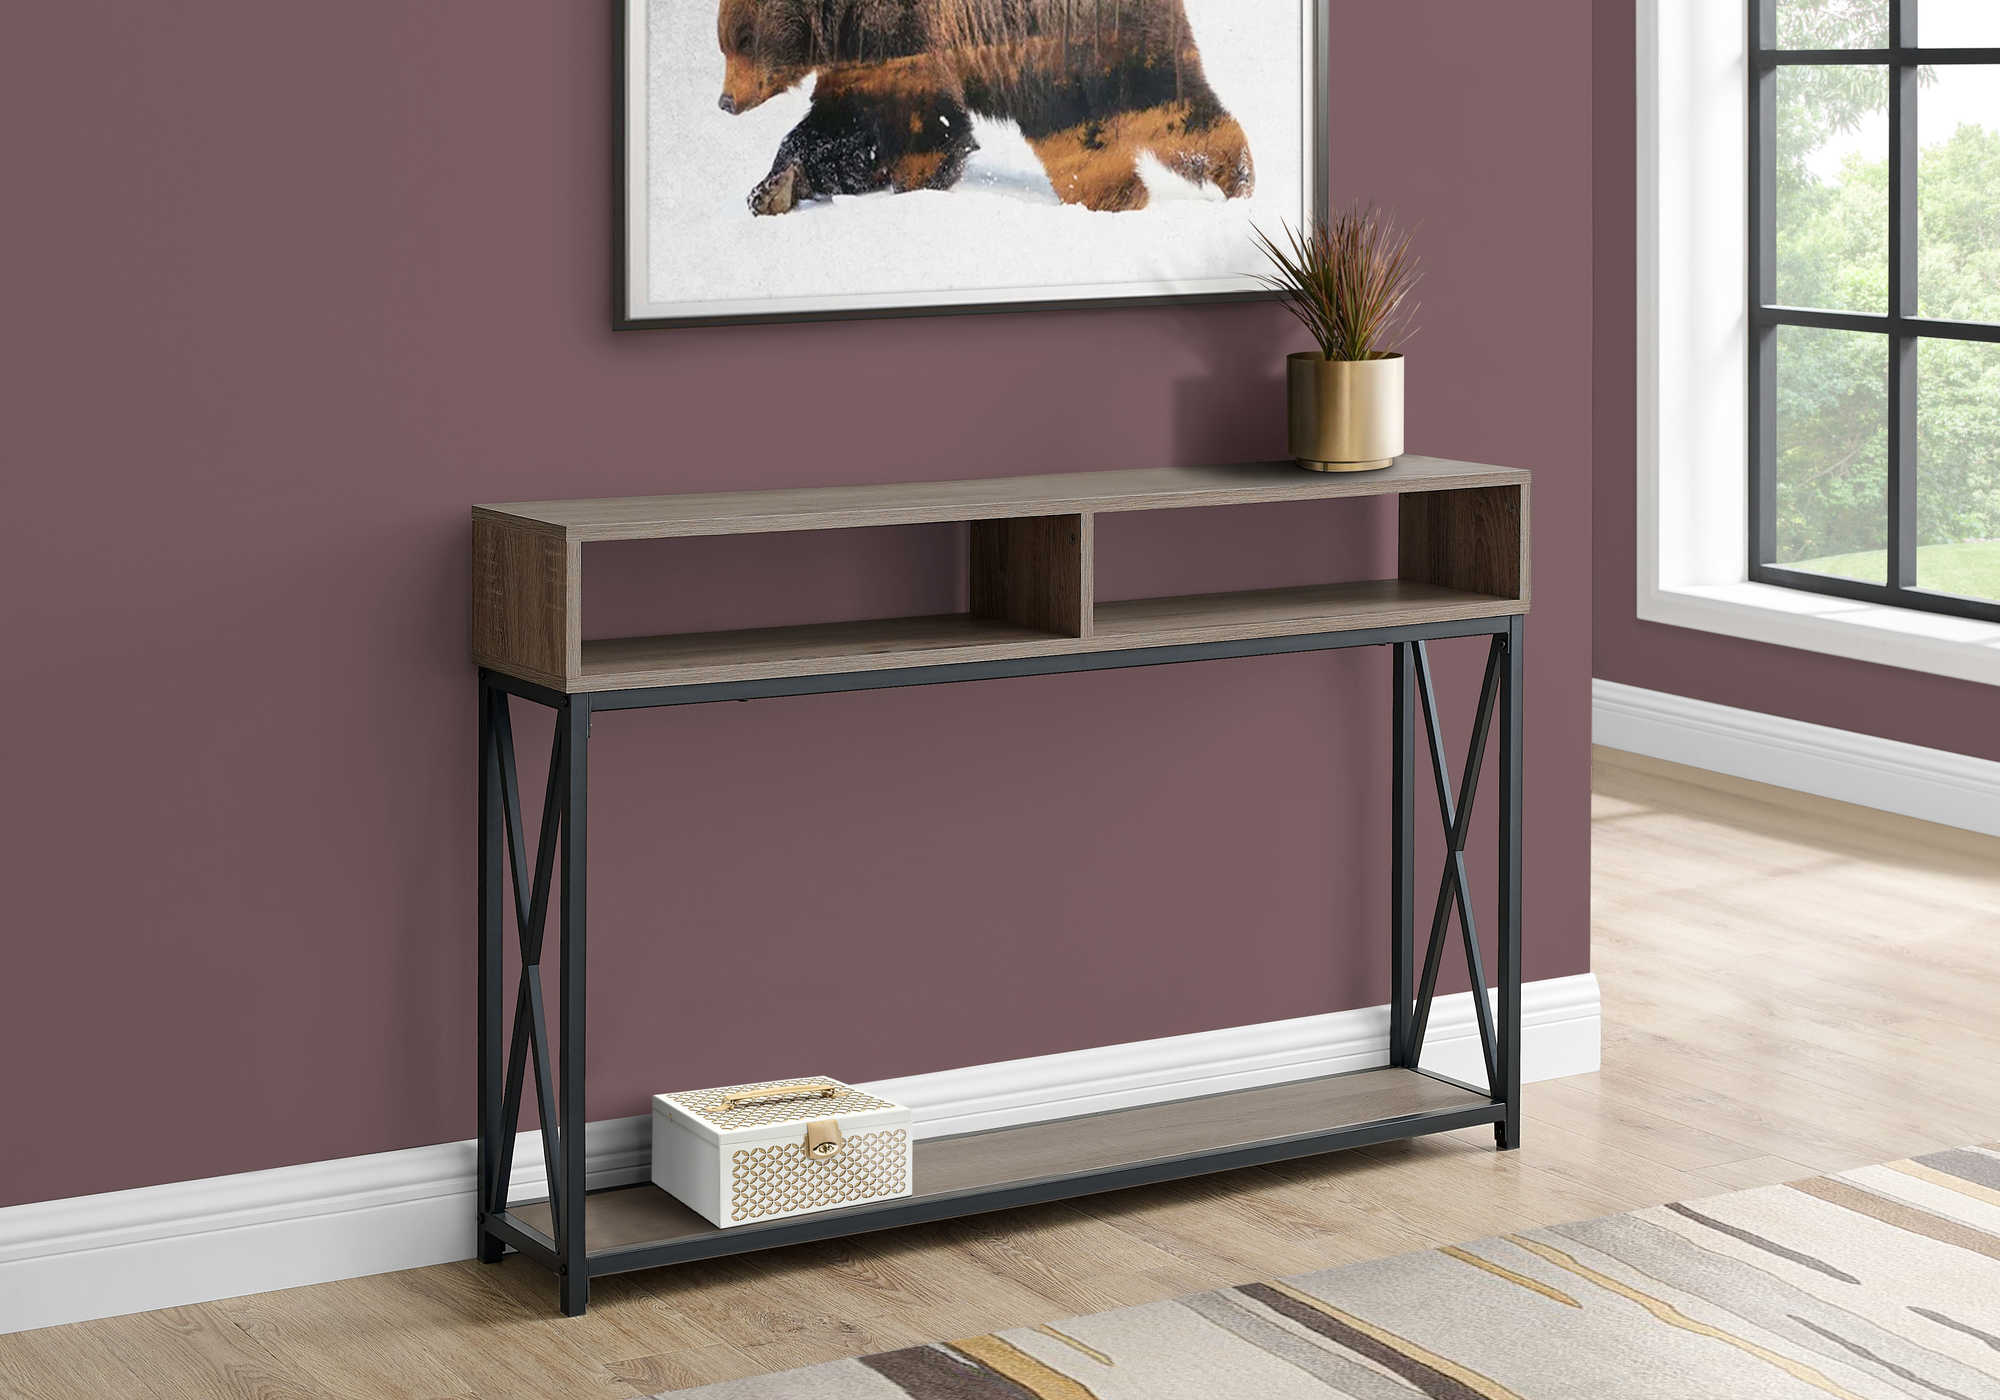 BEDROOM ACCENT CONSOLE TABLE - 48"L / TAUPE / BLACK METAL HALL CONSOLE